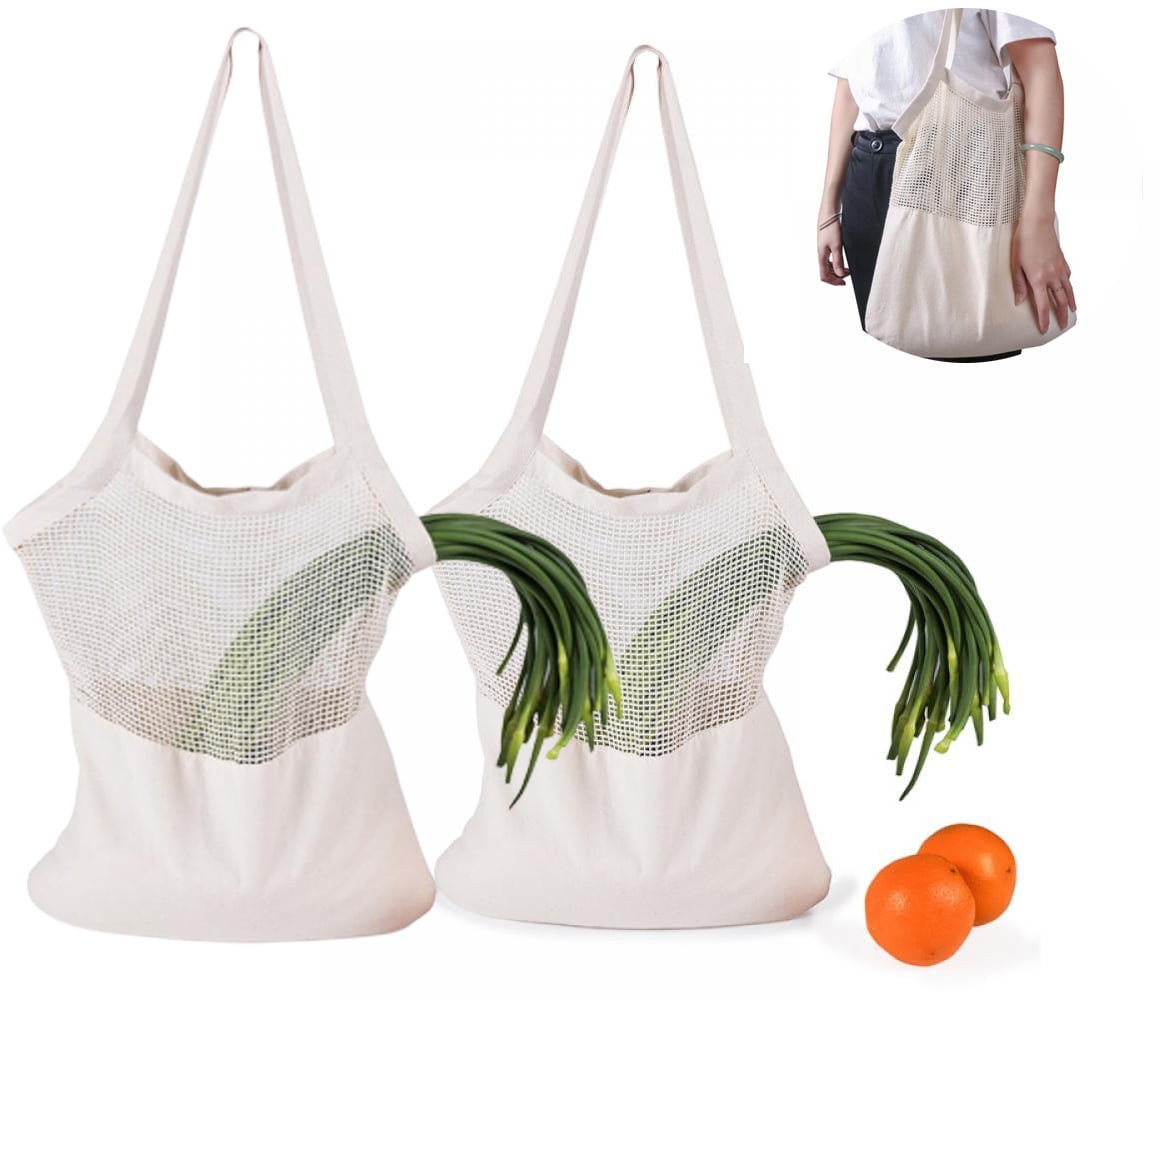 Canvas Shopping Tote Bag The Farmers Market Is My Happy Place Farmers Market Beach for Women